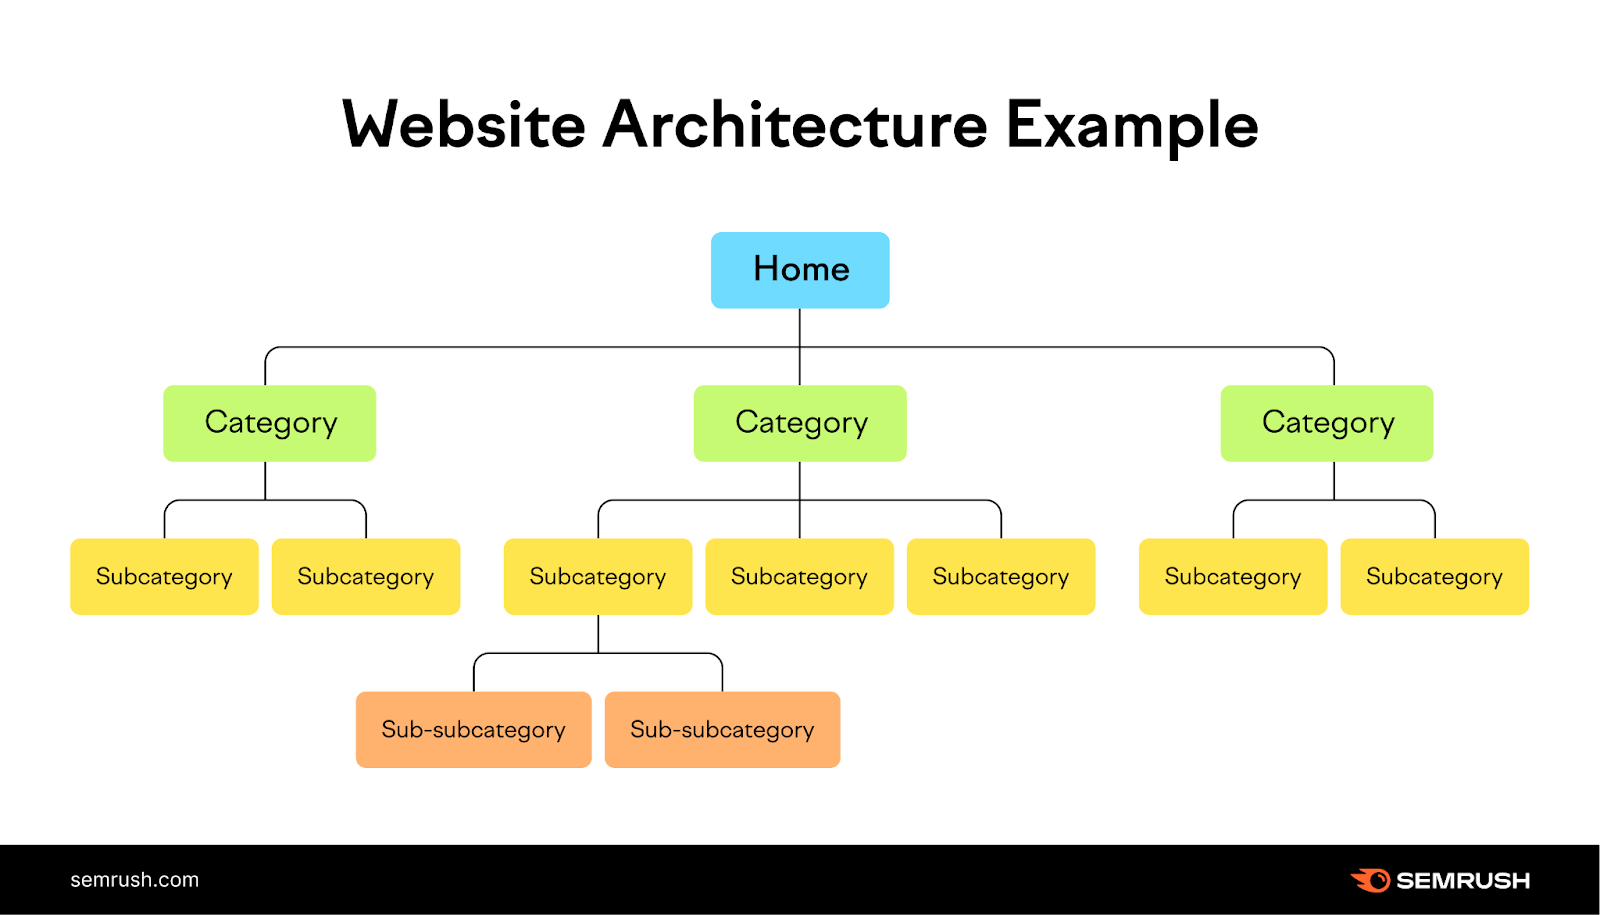 Website architecture with Home branching into Category pages then Subcategory pages.